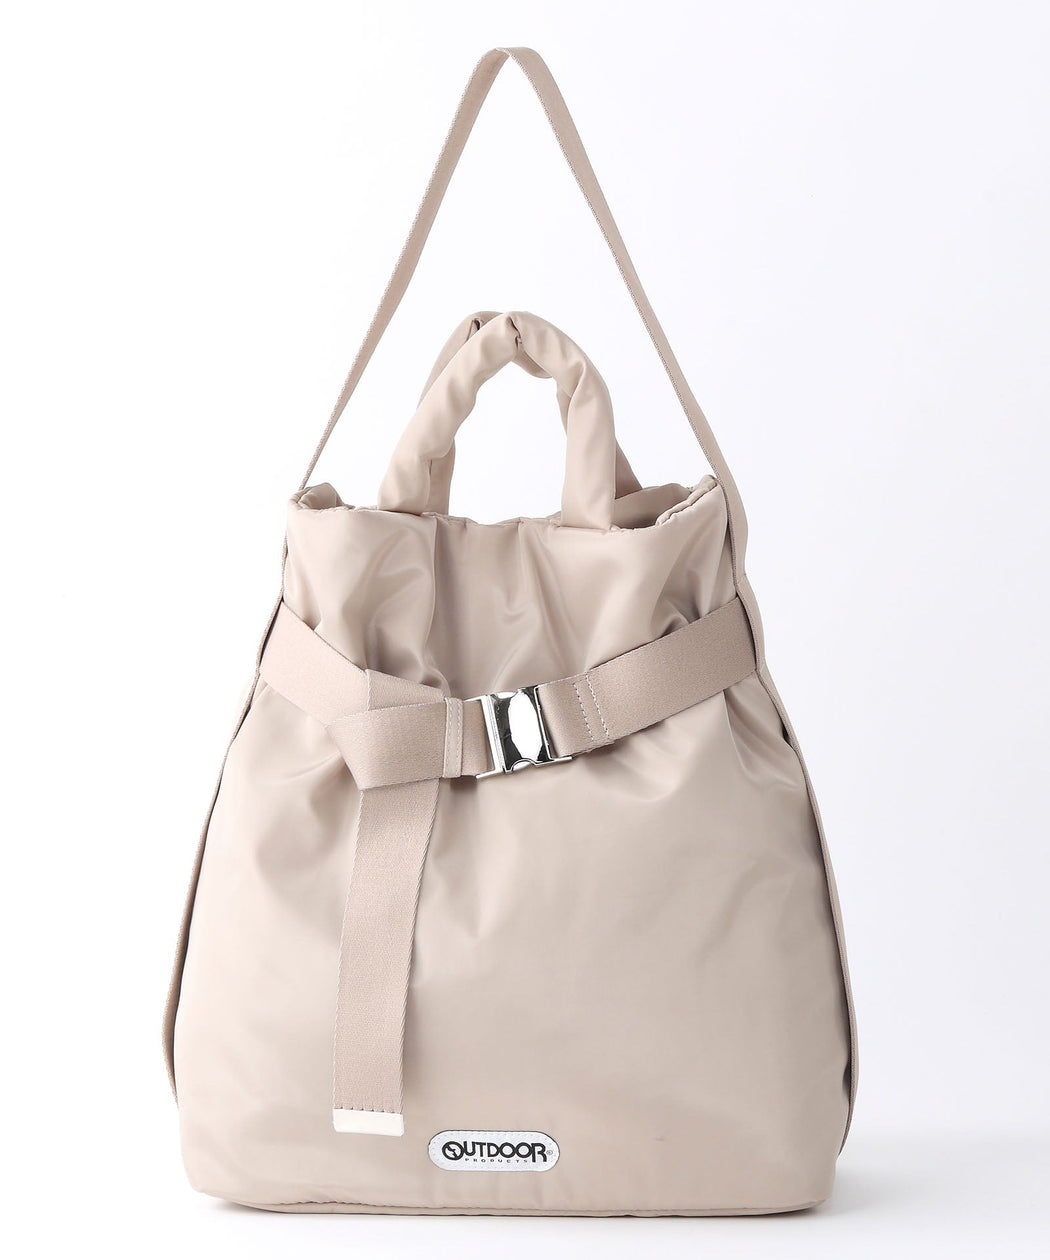 【OUTDOOR PRODUCTS】Puilting 2WAY Tote - LA MARINE FRANCAISE